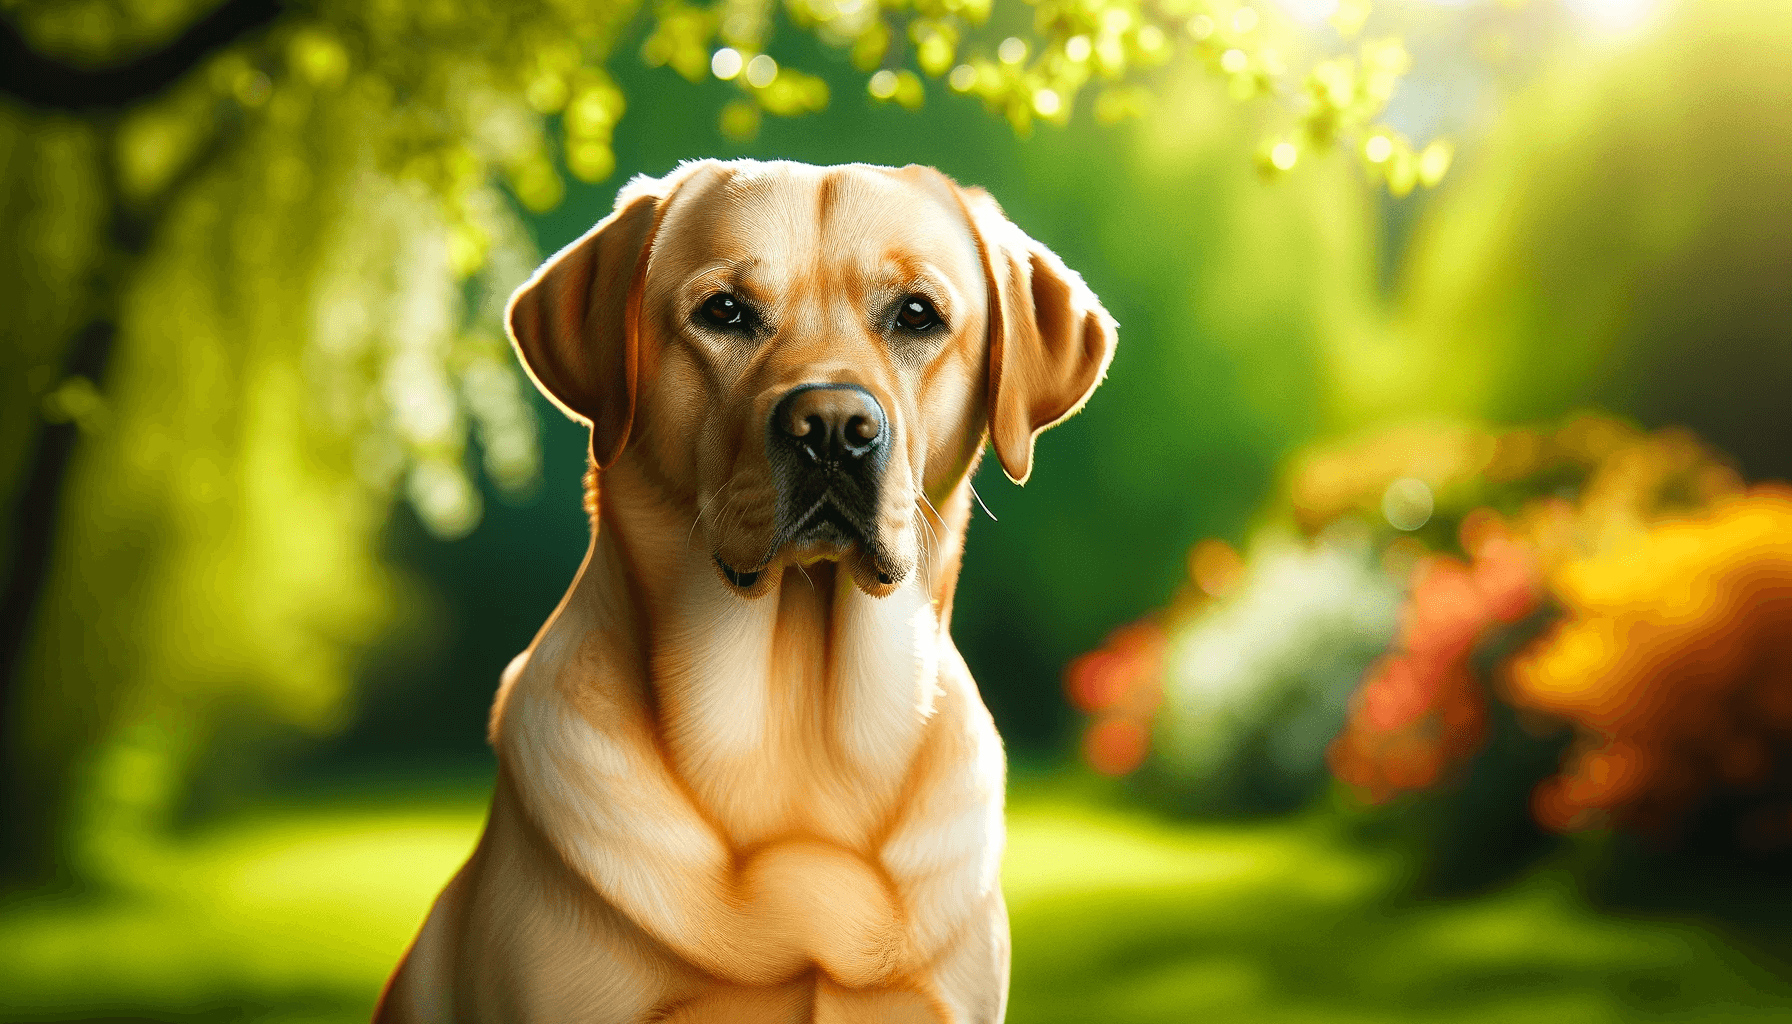 Stunning portrait of a yellow Labrador Retriever (Labradorii) with a shiny coat set against a vibrant outdoor backdrop. The image focuses on the Labrador positioned gracefully.